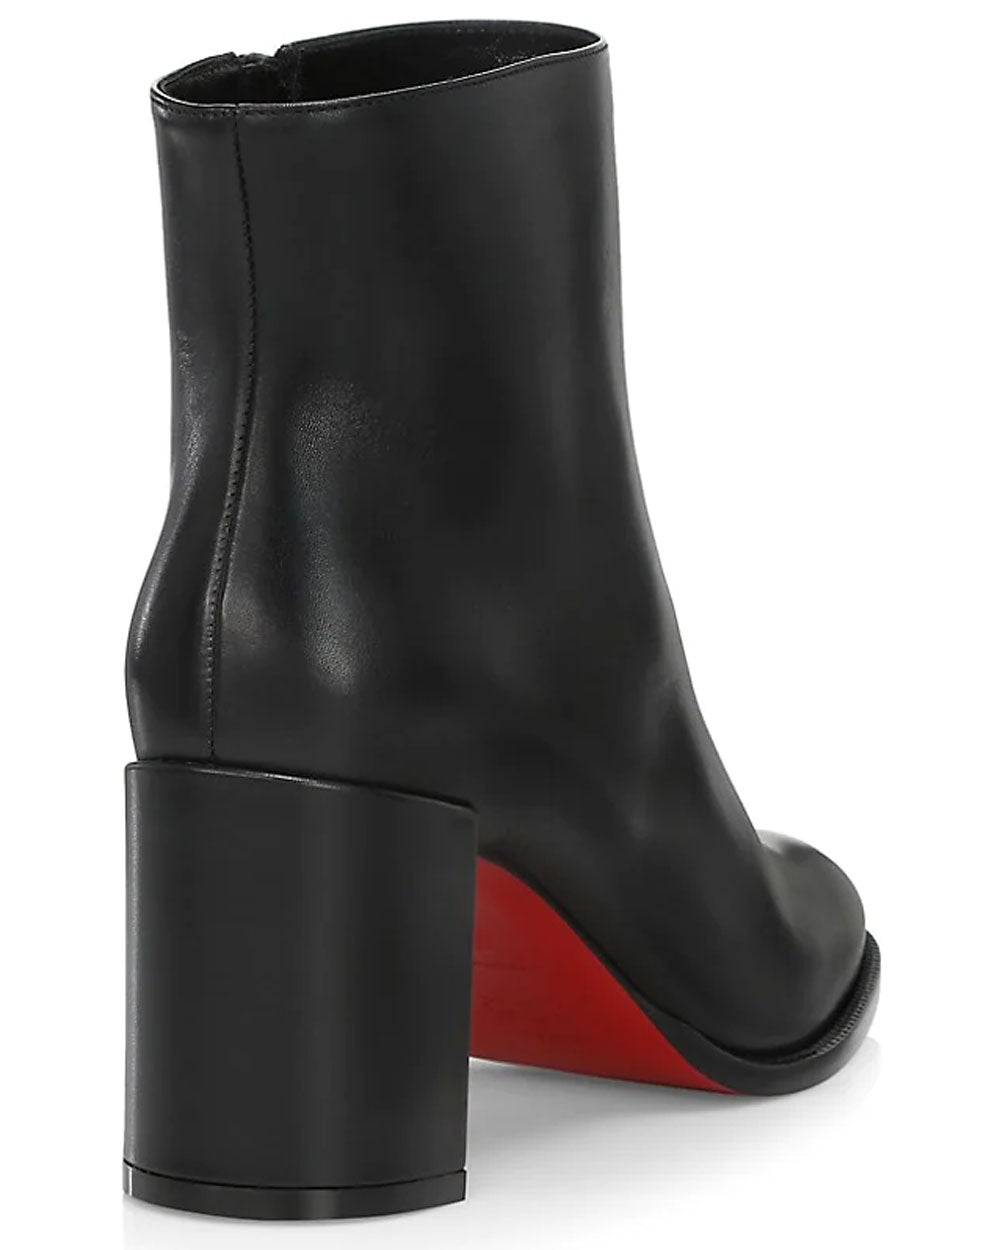 Adoxa 70 Leather Ankle Boot in Black